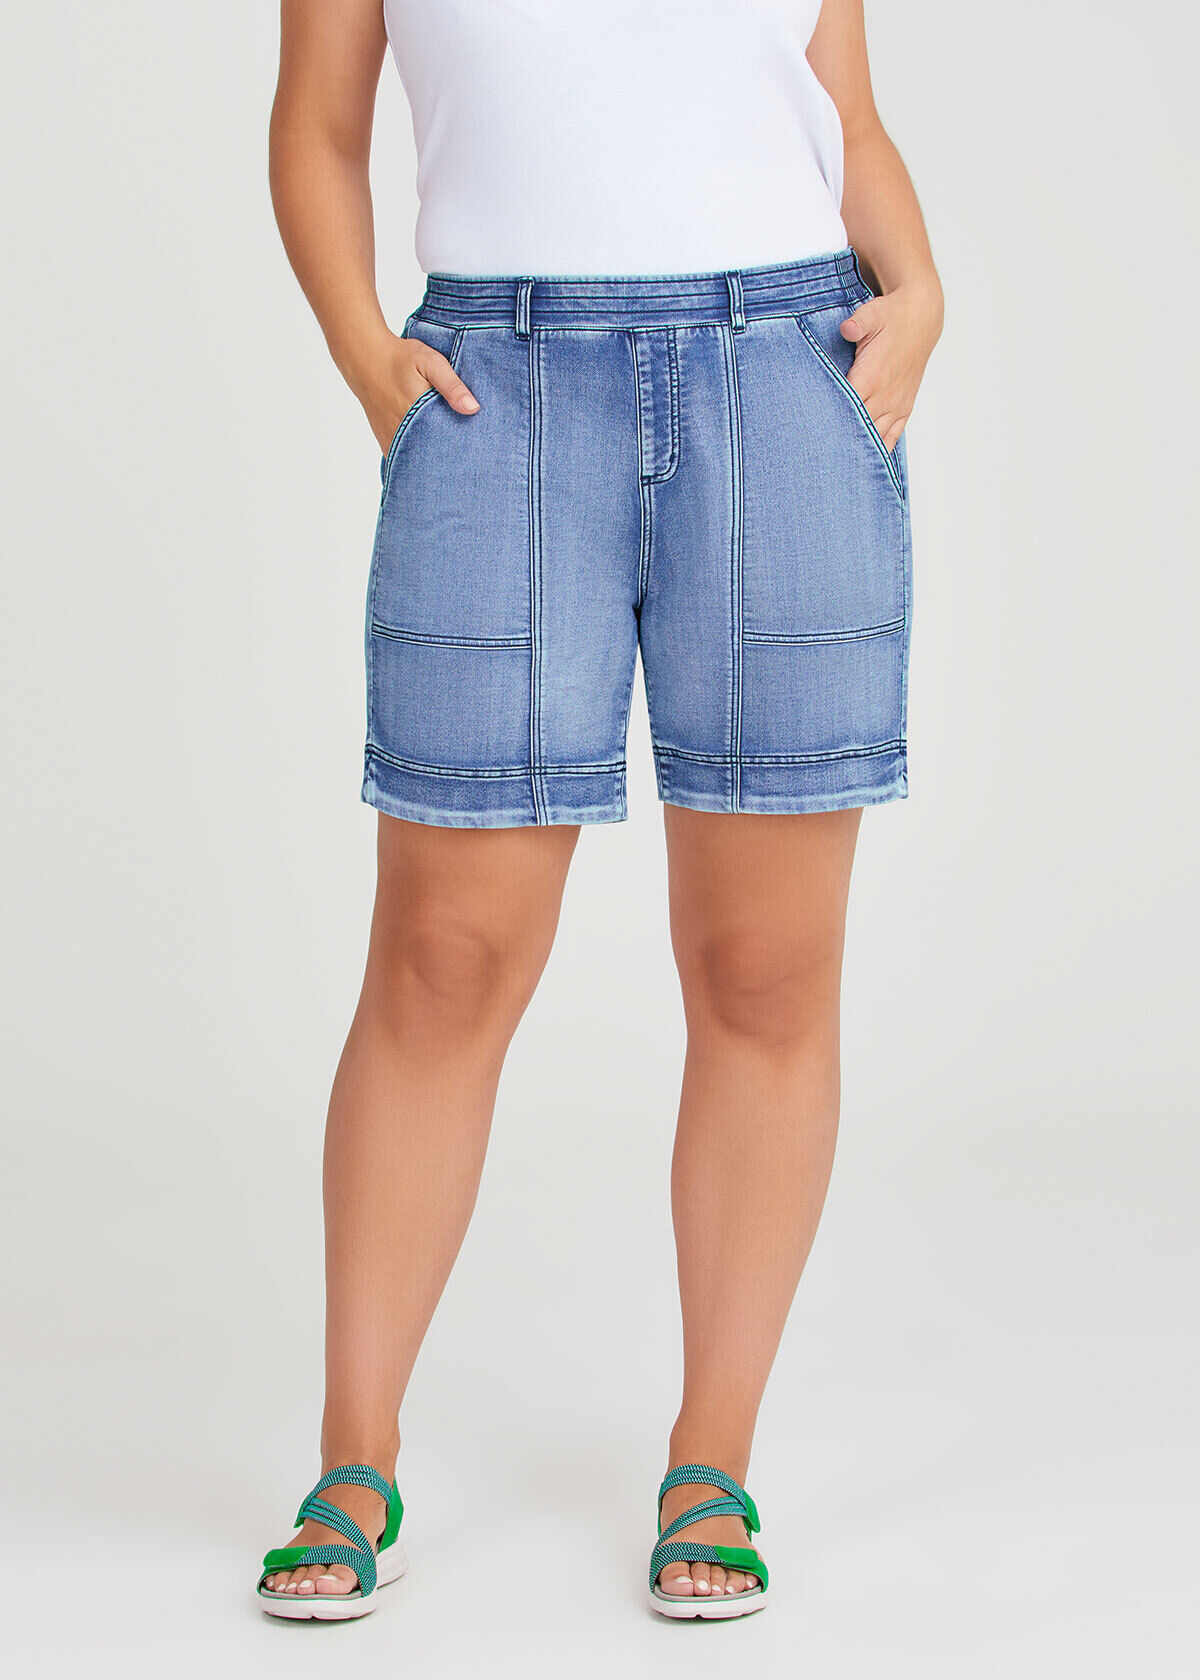 PLUS SIZE CLEARANCE ! Fringes So Cute Denim Shorts ! – Just Be Cute Boutique